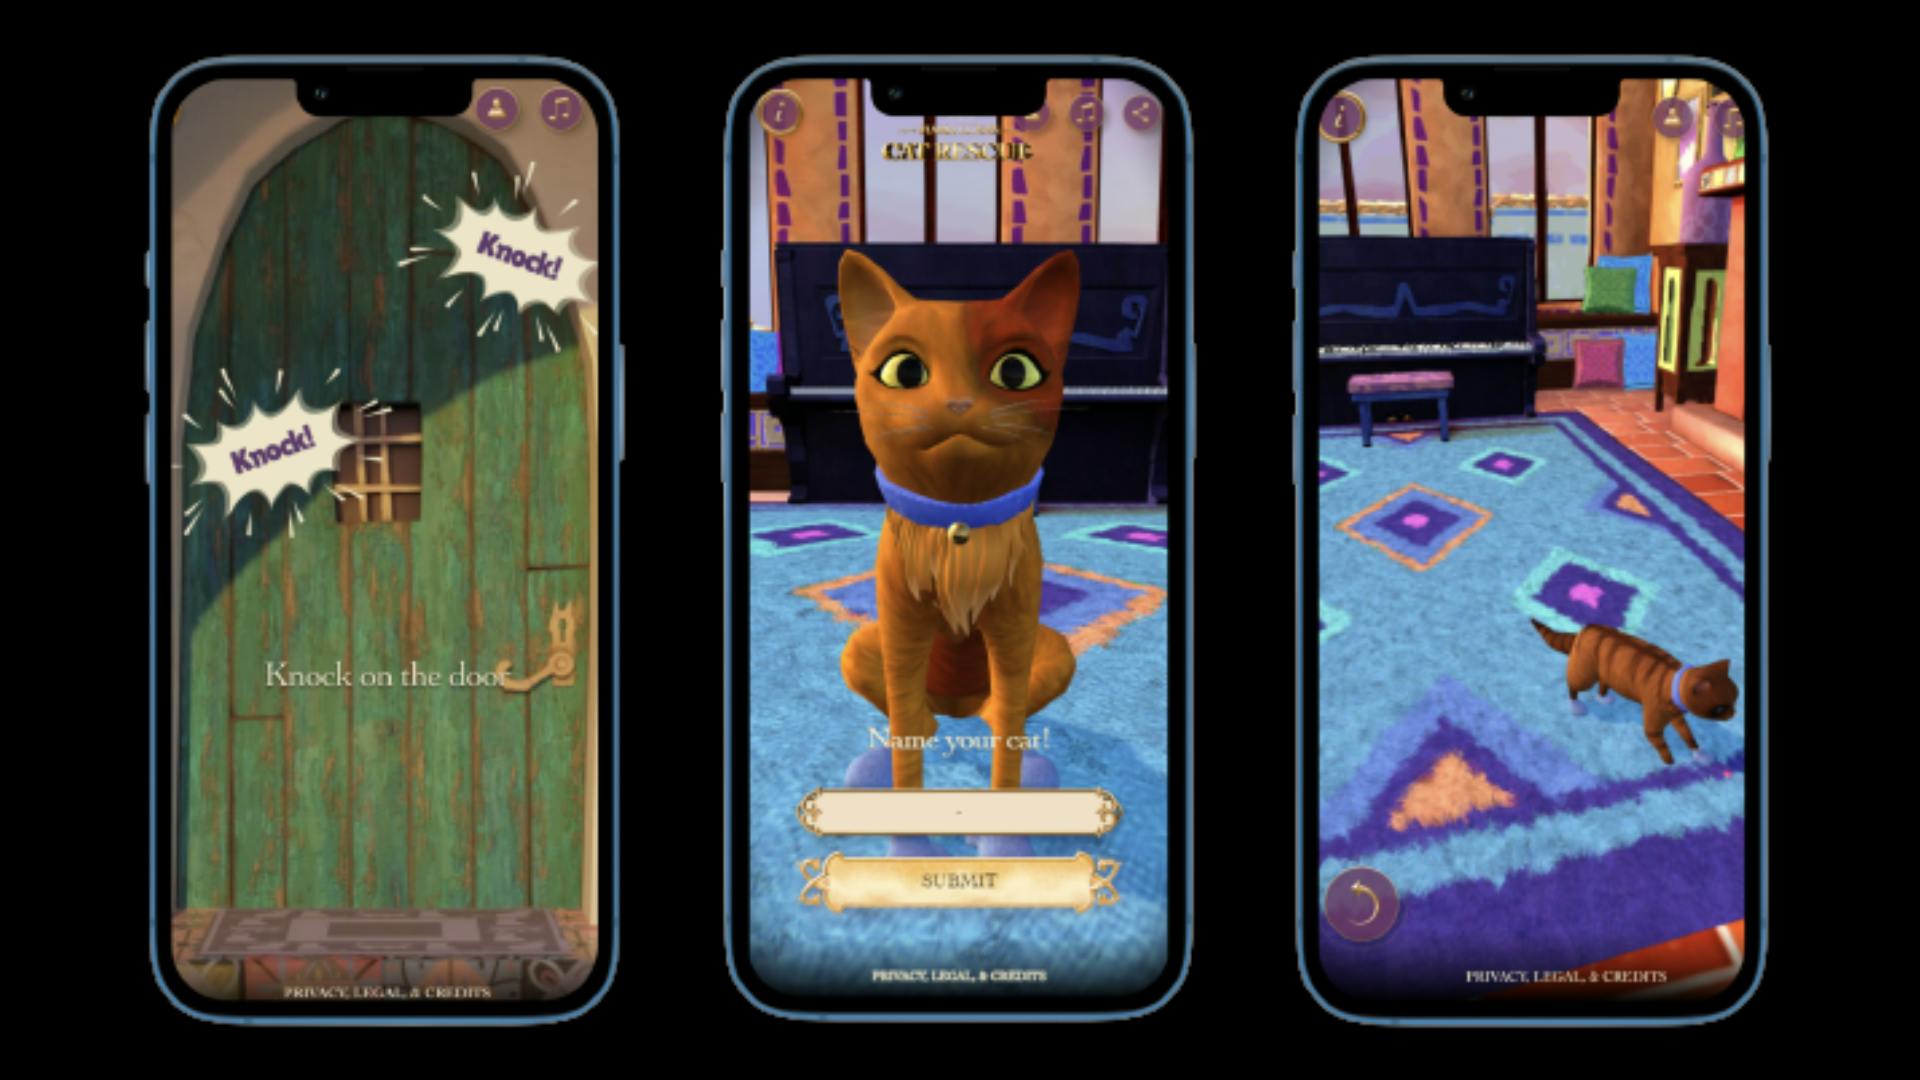 Three images showing how the My Digi-Cat experience looks on a phone screen: knocking on a door, naming a cat, and playing with a laser.